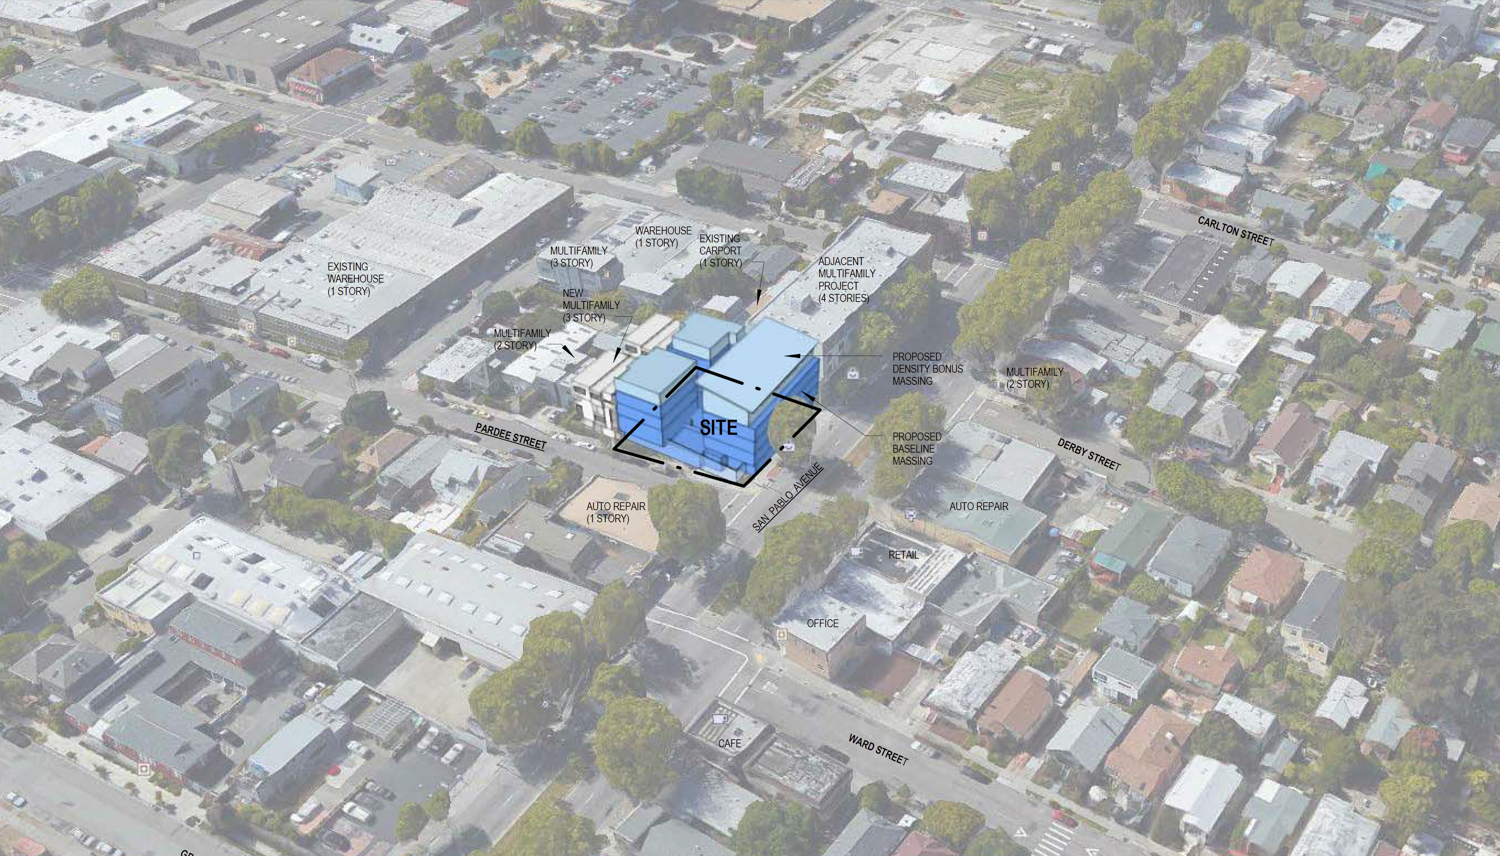 Outdated proposal for 2720 San Pablo Avenue, aerial perspective by Devi Dutta Architecture